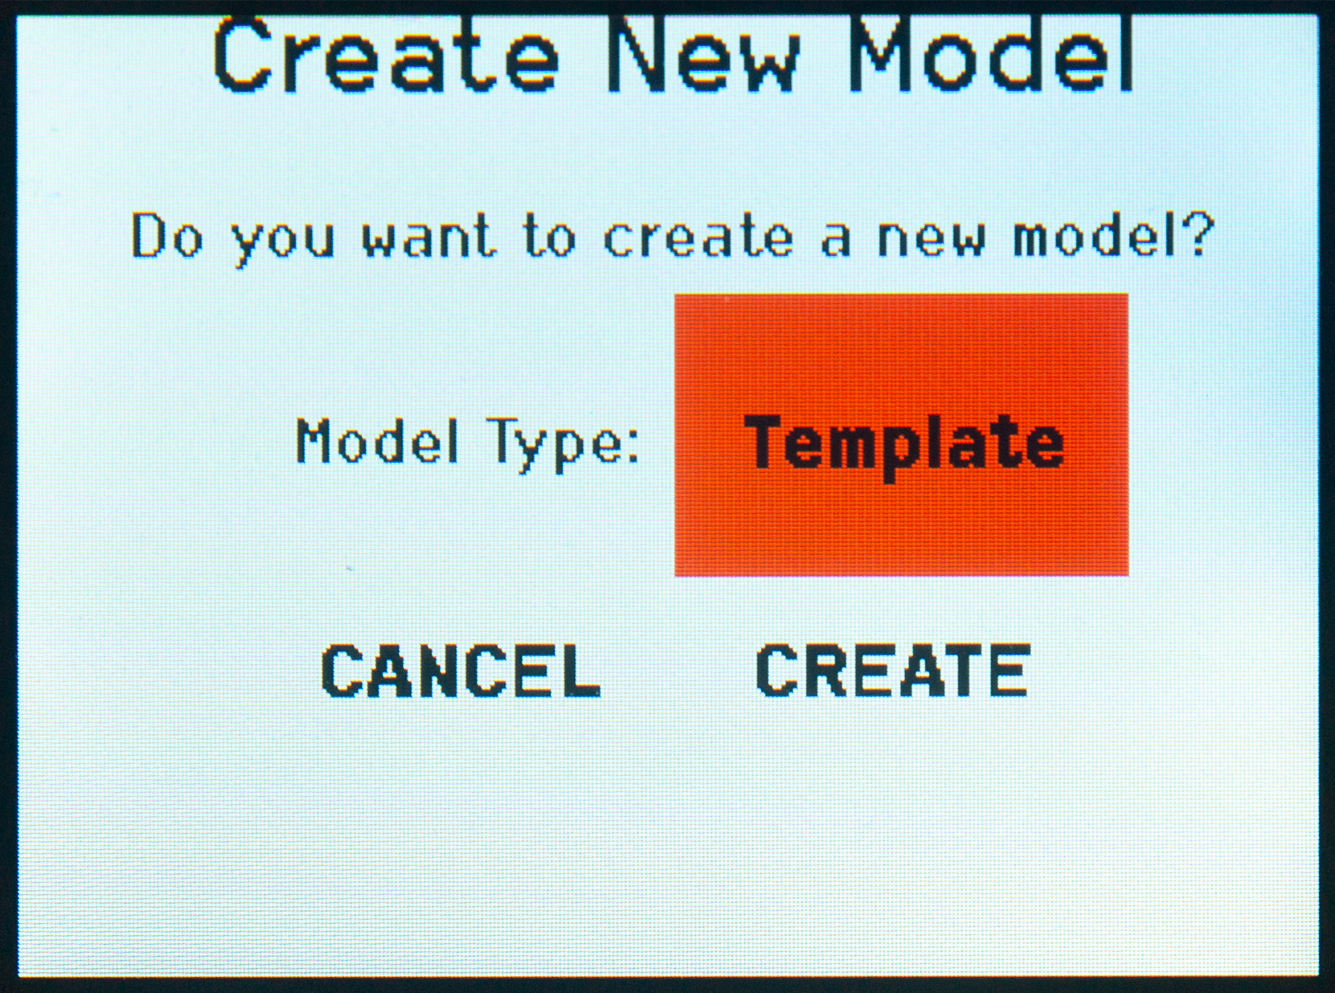 Image of the NX8 Transmitter's light backlit screen displaying the Create New Model template screen